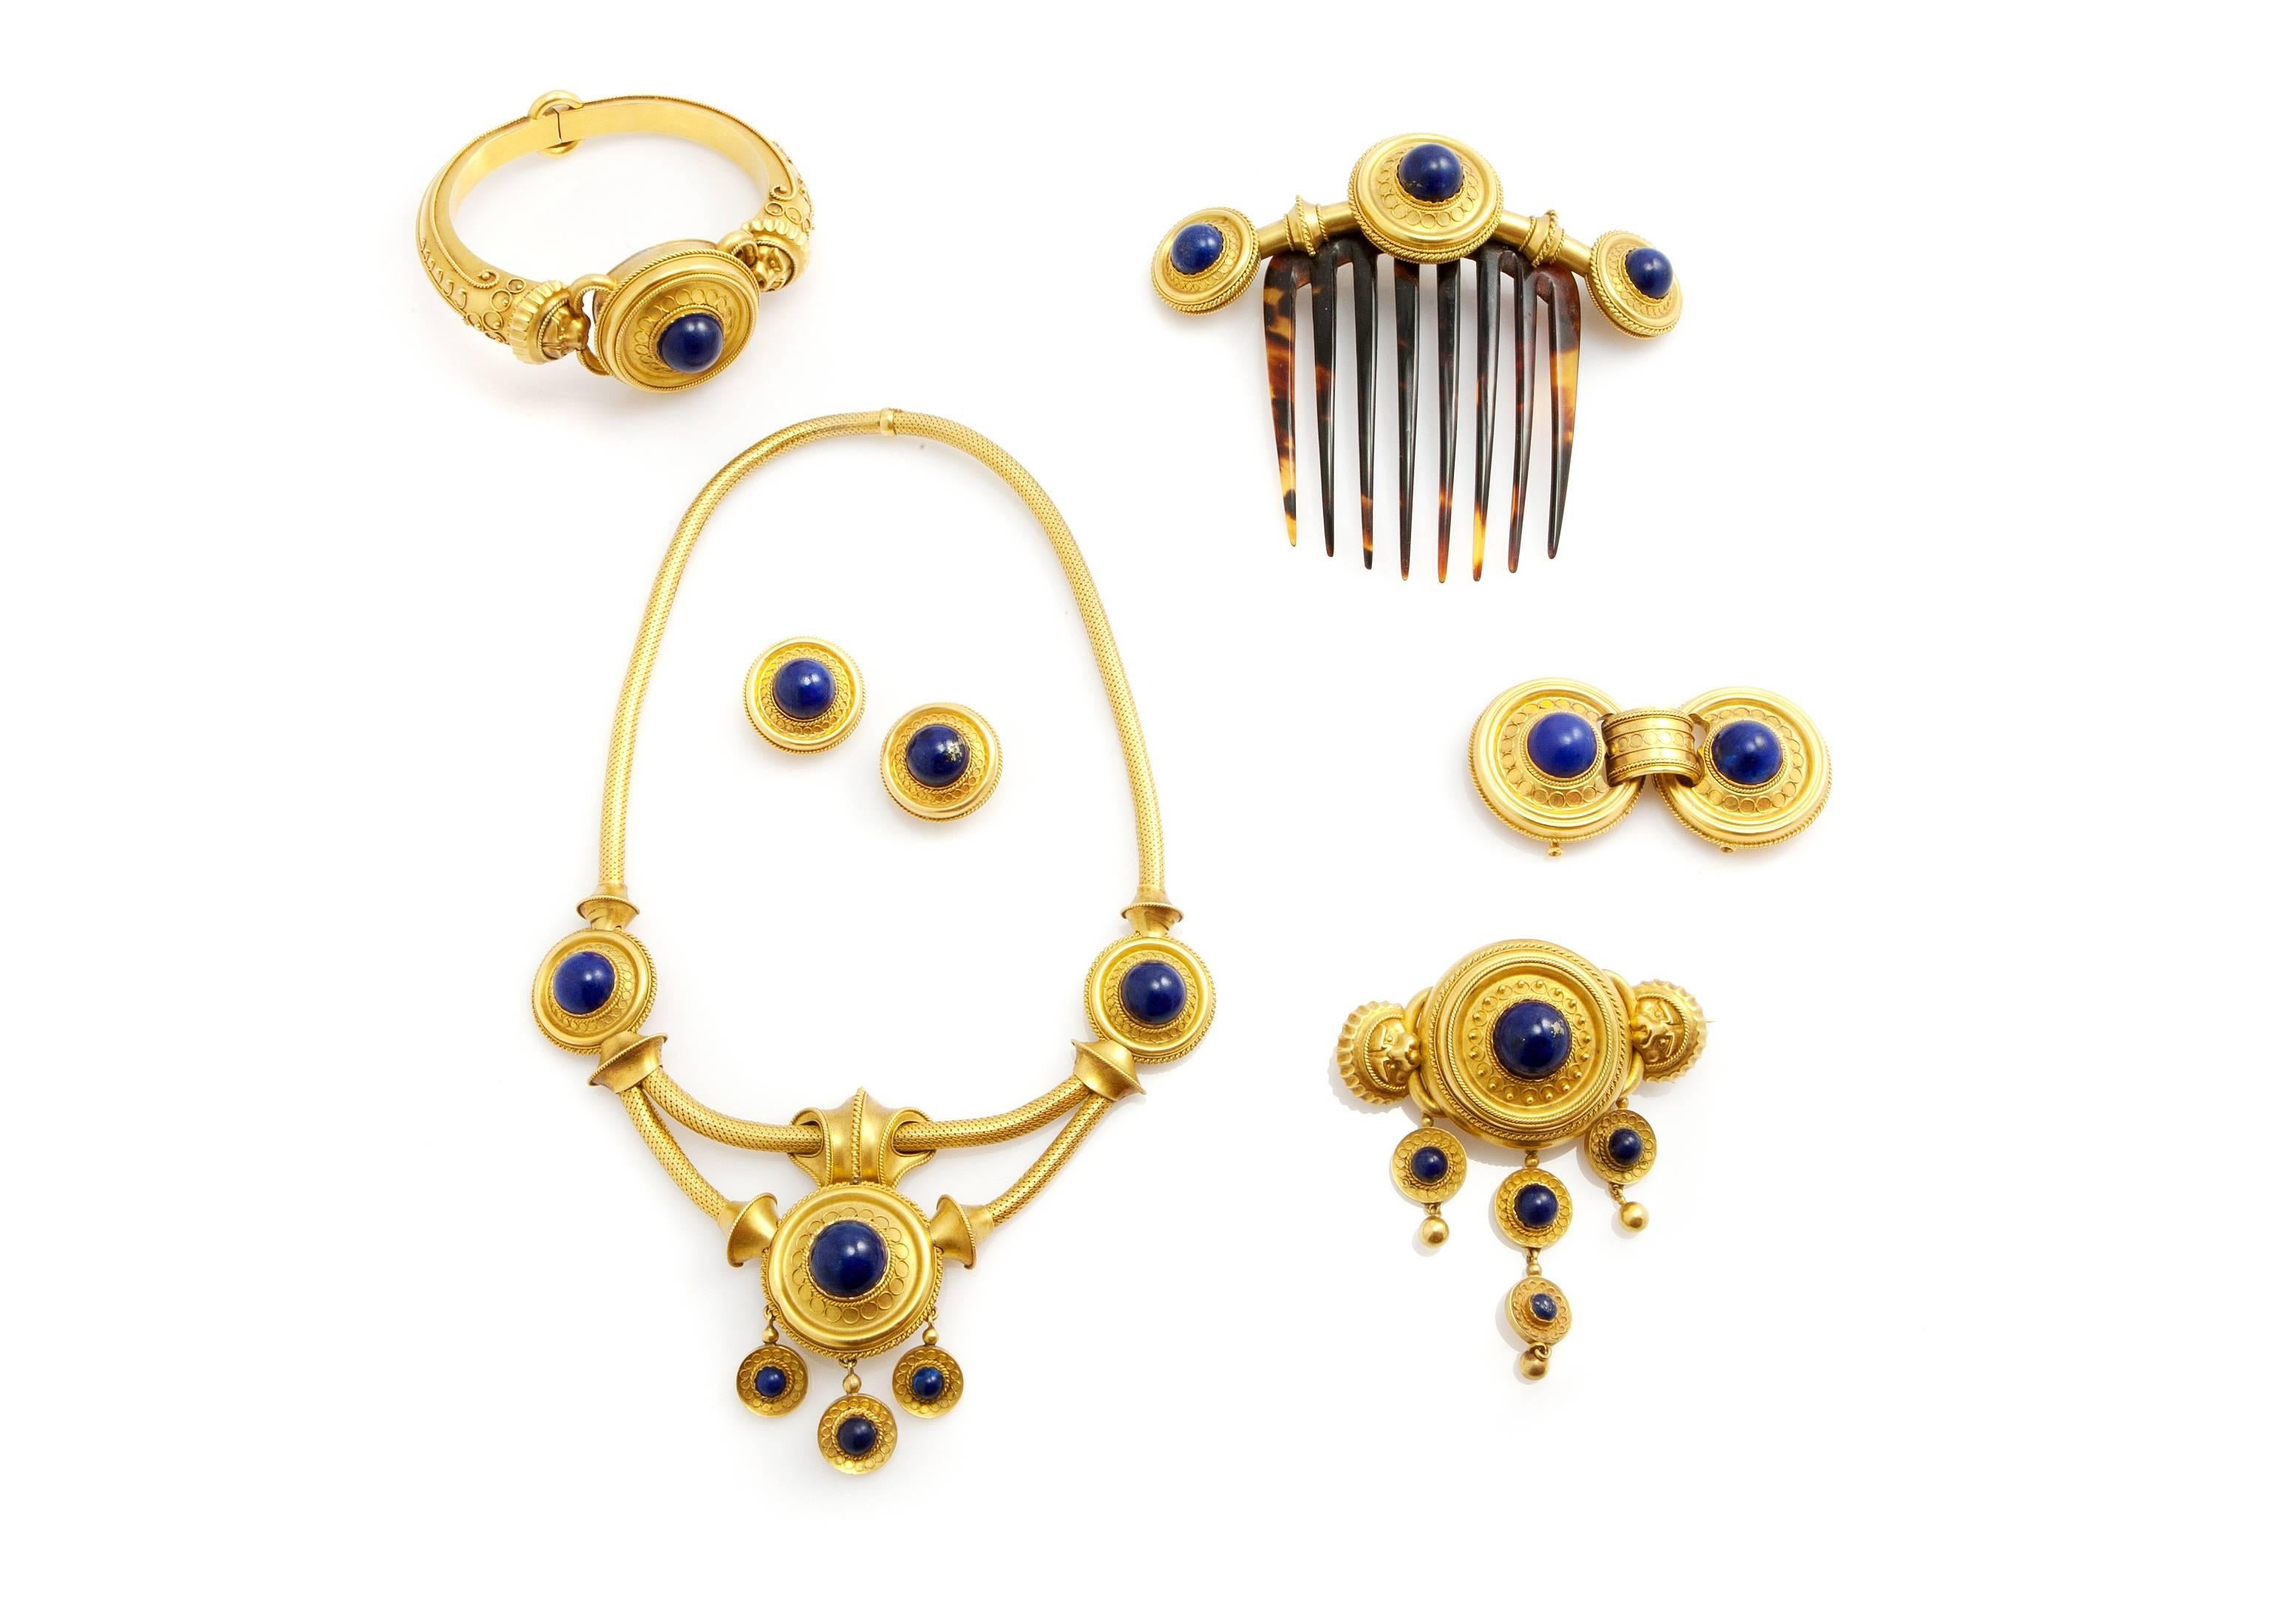 This unique and beautiful parure is set in  18ct yellow gold  with lapis lazuli and it was made in France around 1870 (Napoleon III), in the Etruscan style (archaeological revival)
It includes:
1. bangle 46.68g, 30mm x 20mm x 60mm inner diameter
2.